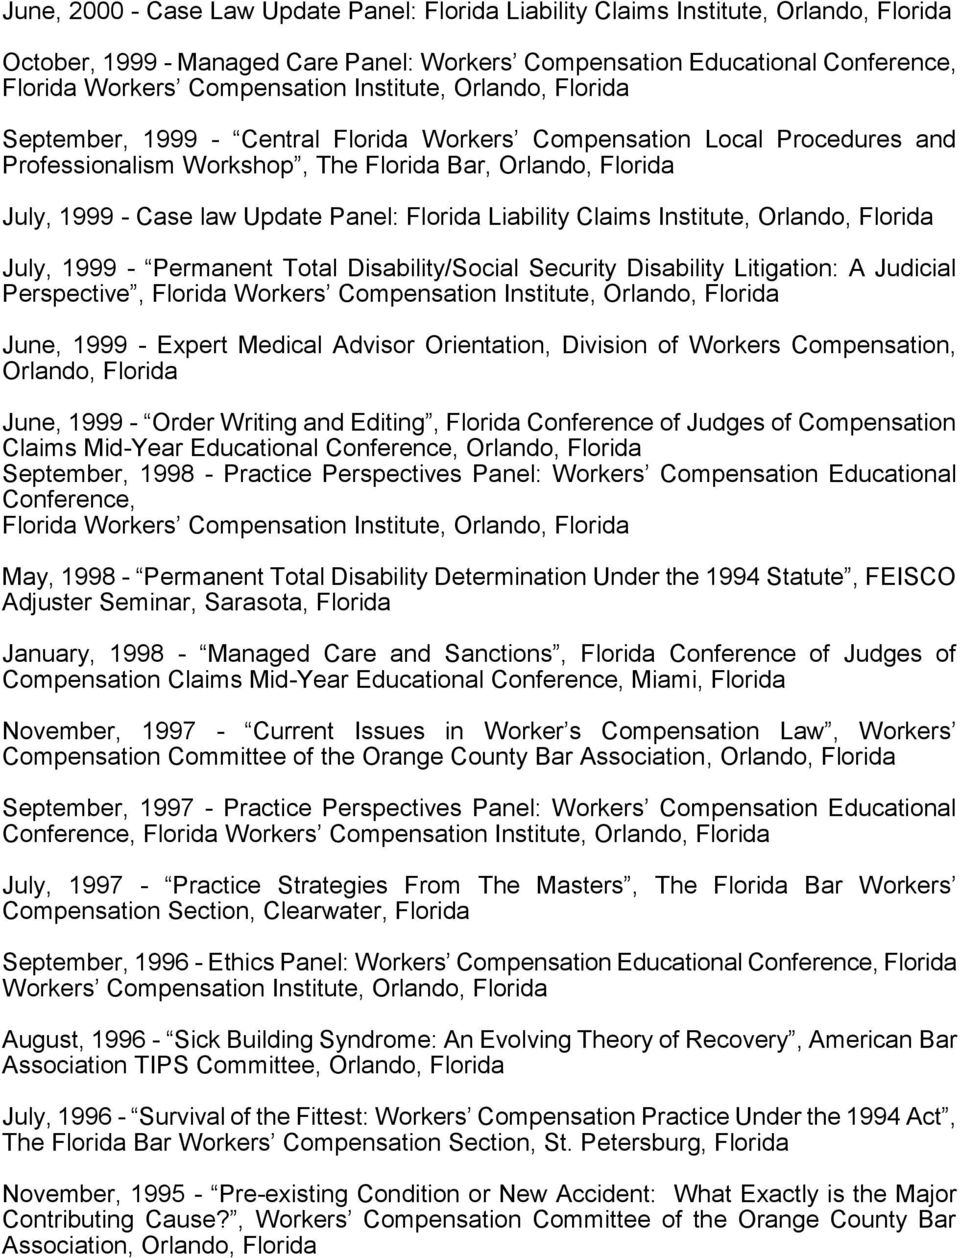 Florida Liability Claims Institute, Orlando, Florida July, 1999 - Permanent Total Disability/Social Security Disability Litigation: A Judicial Perspective, Florida Workers Compensation Institute,